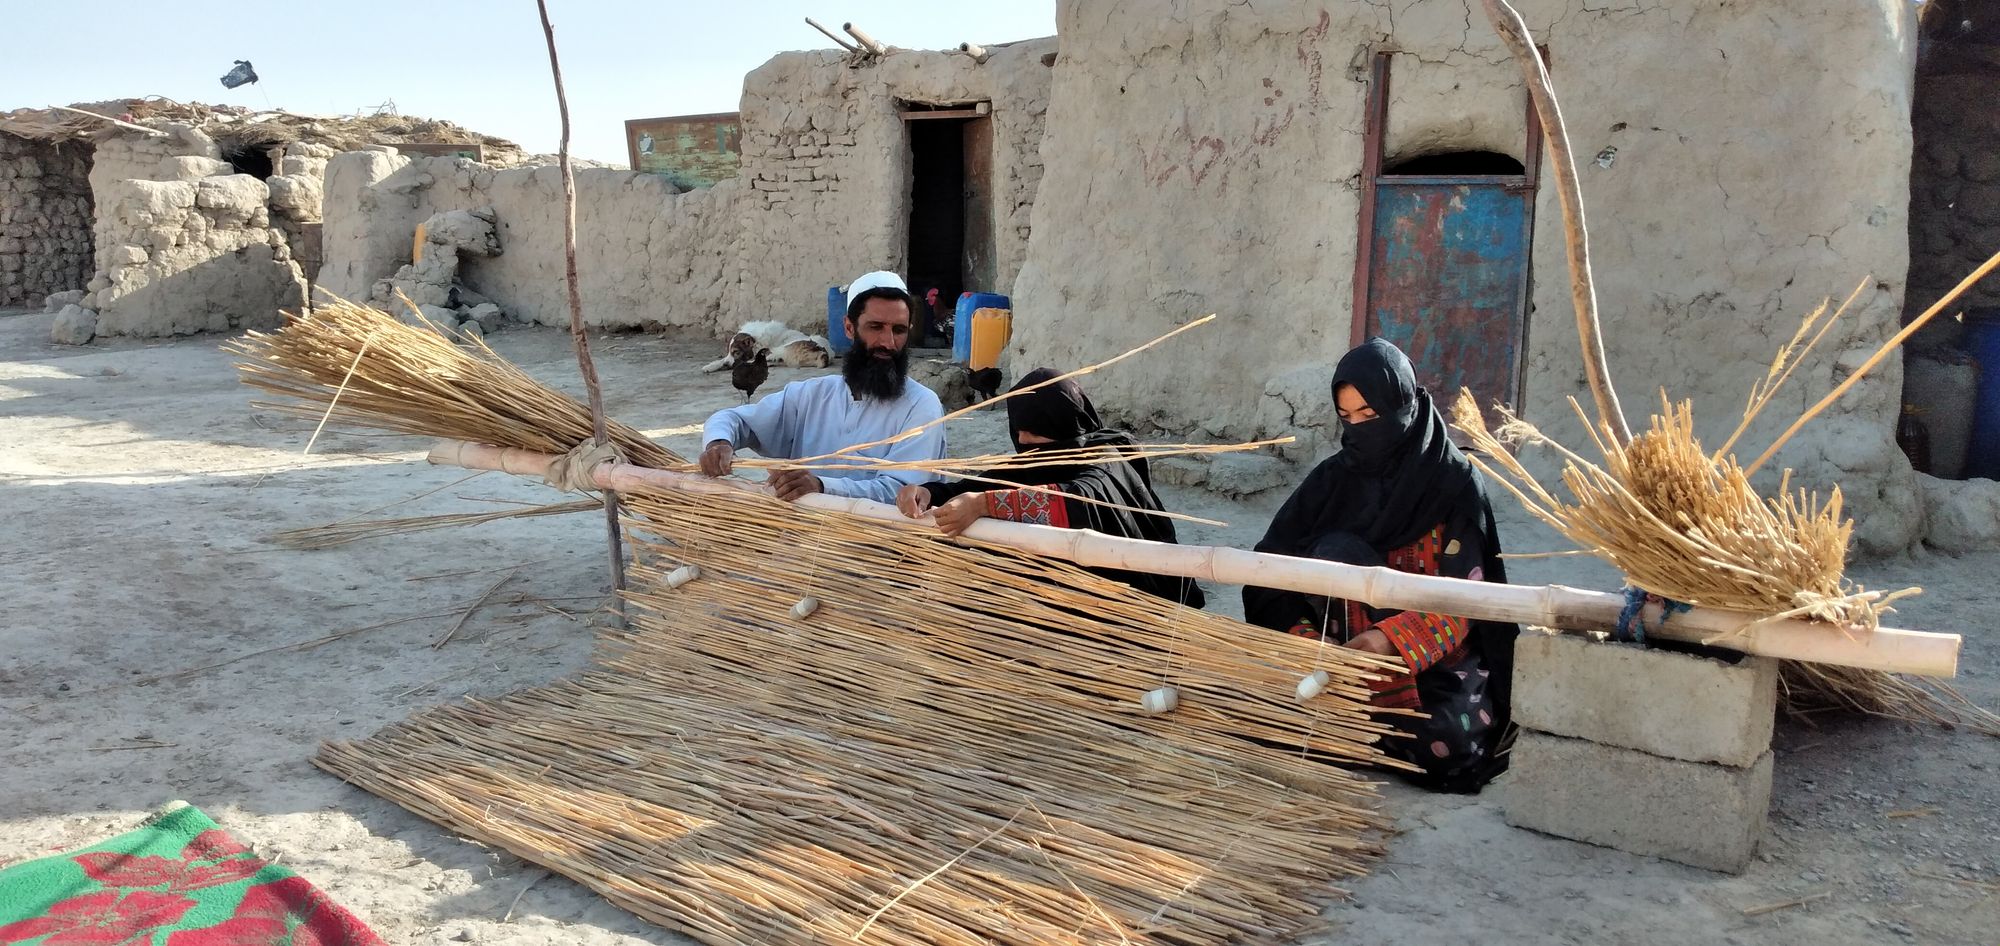 Weaving a Life From Reeds and Straw